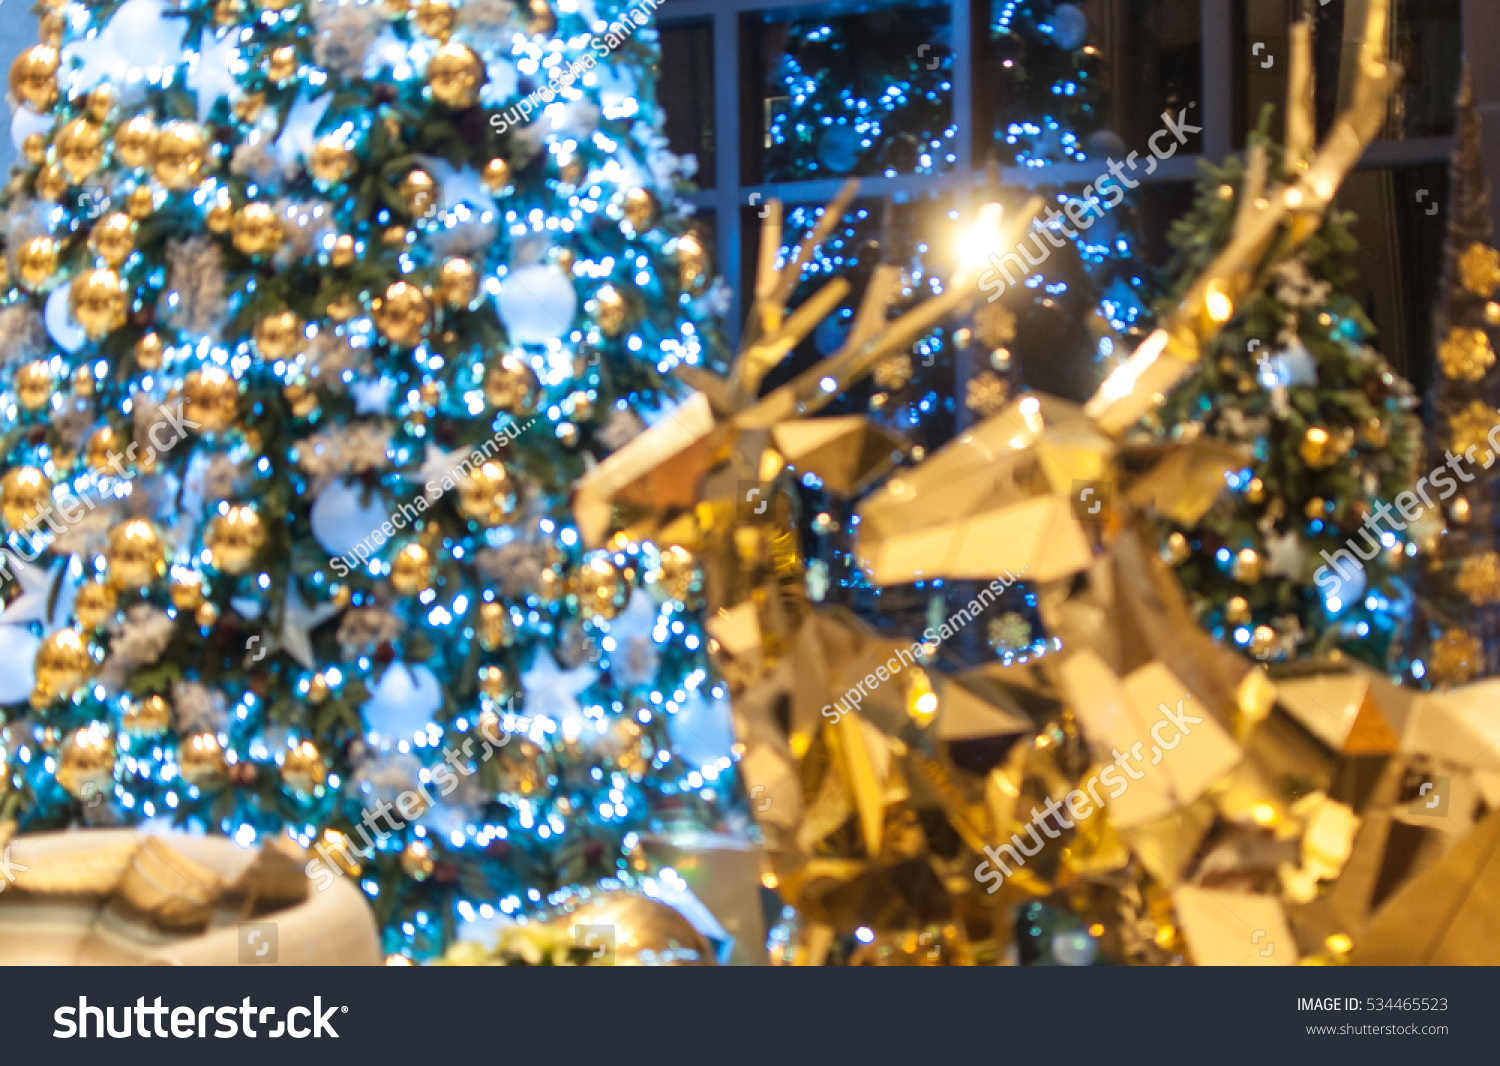 Bokeh background of Christmas tree and golden reindeer. Blurred background. Christmas theme. #534465523